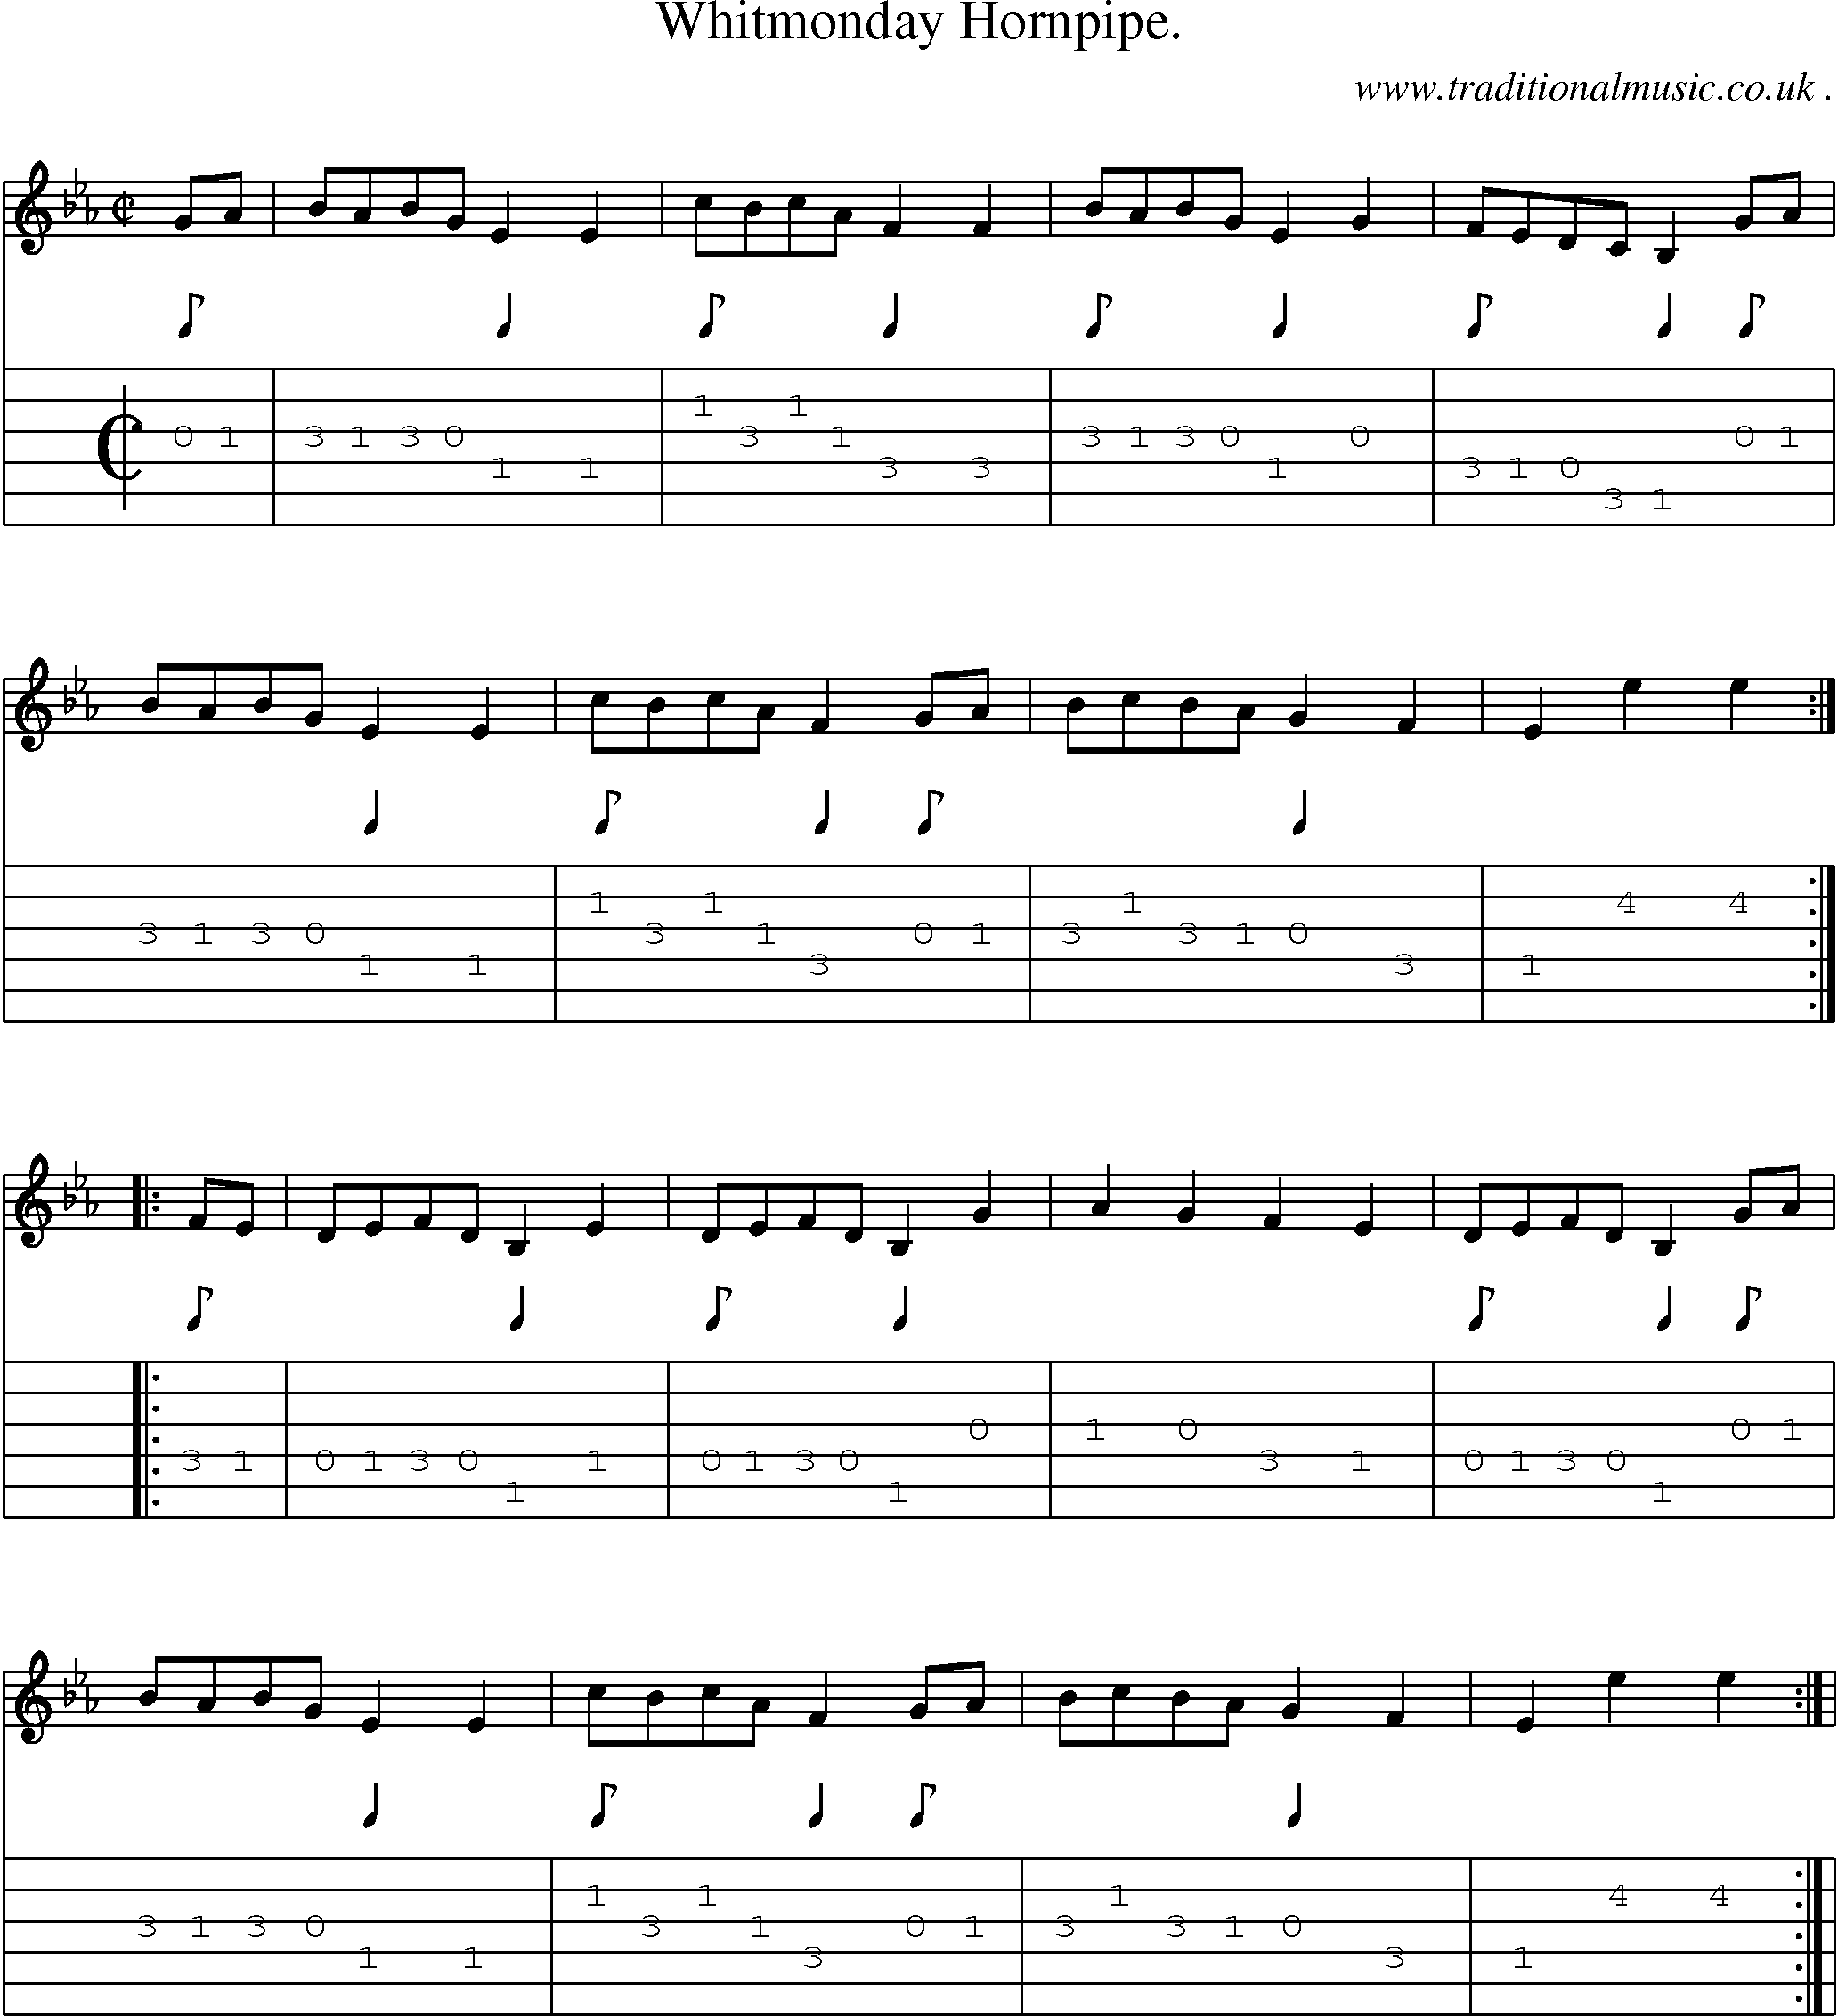 Sheet-Music and Guitar Tabs for Whitmonday Hornpipe